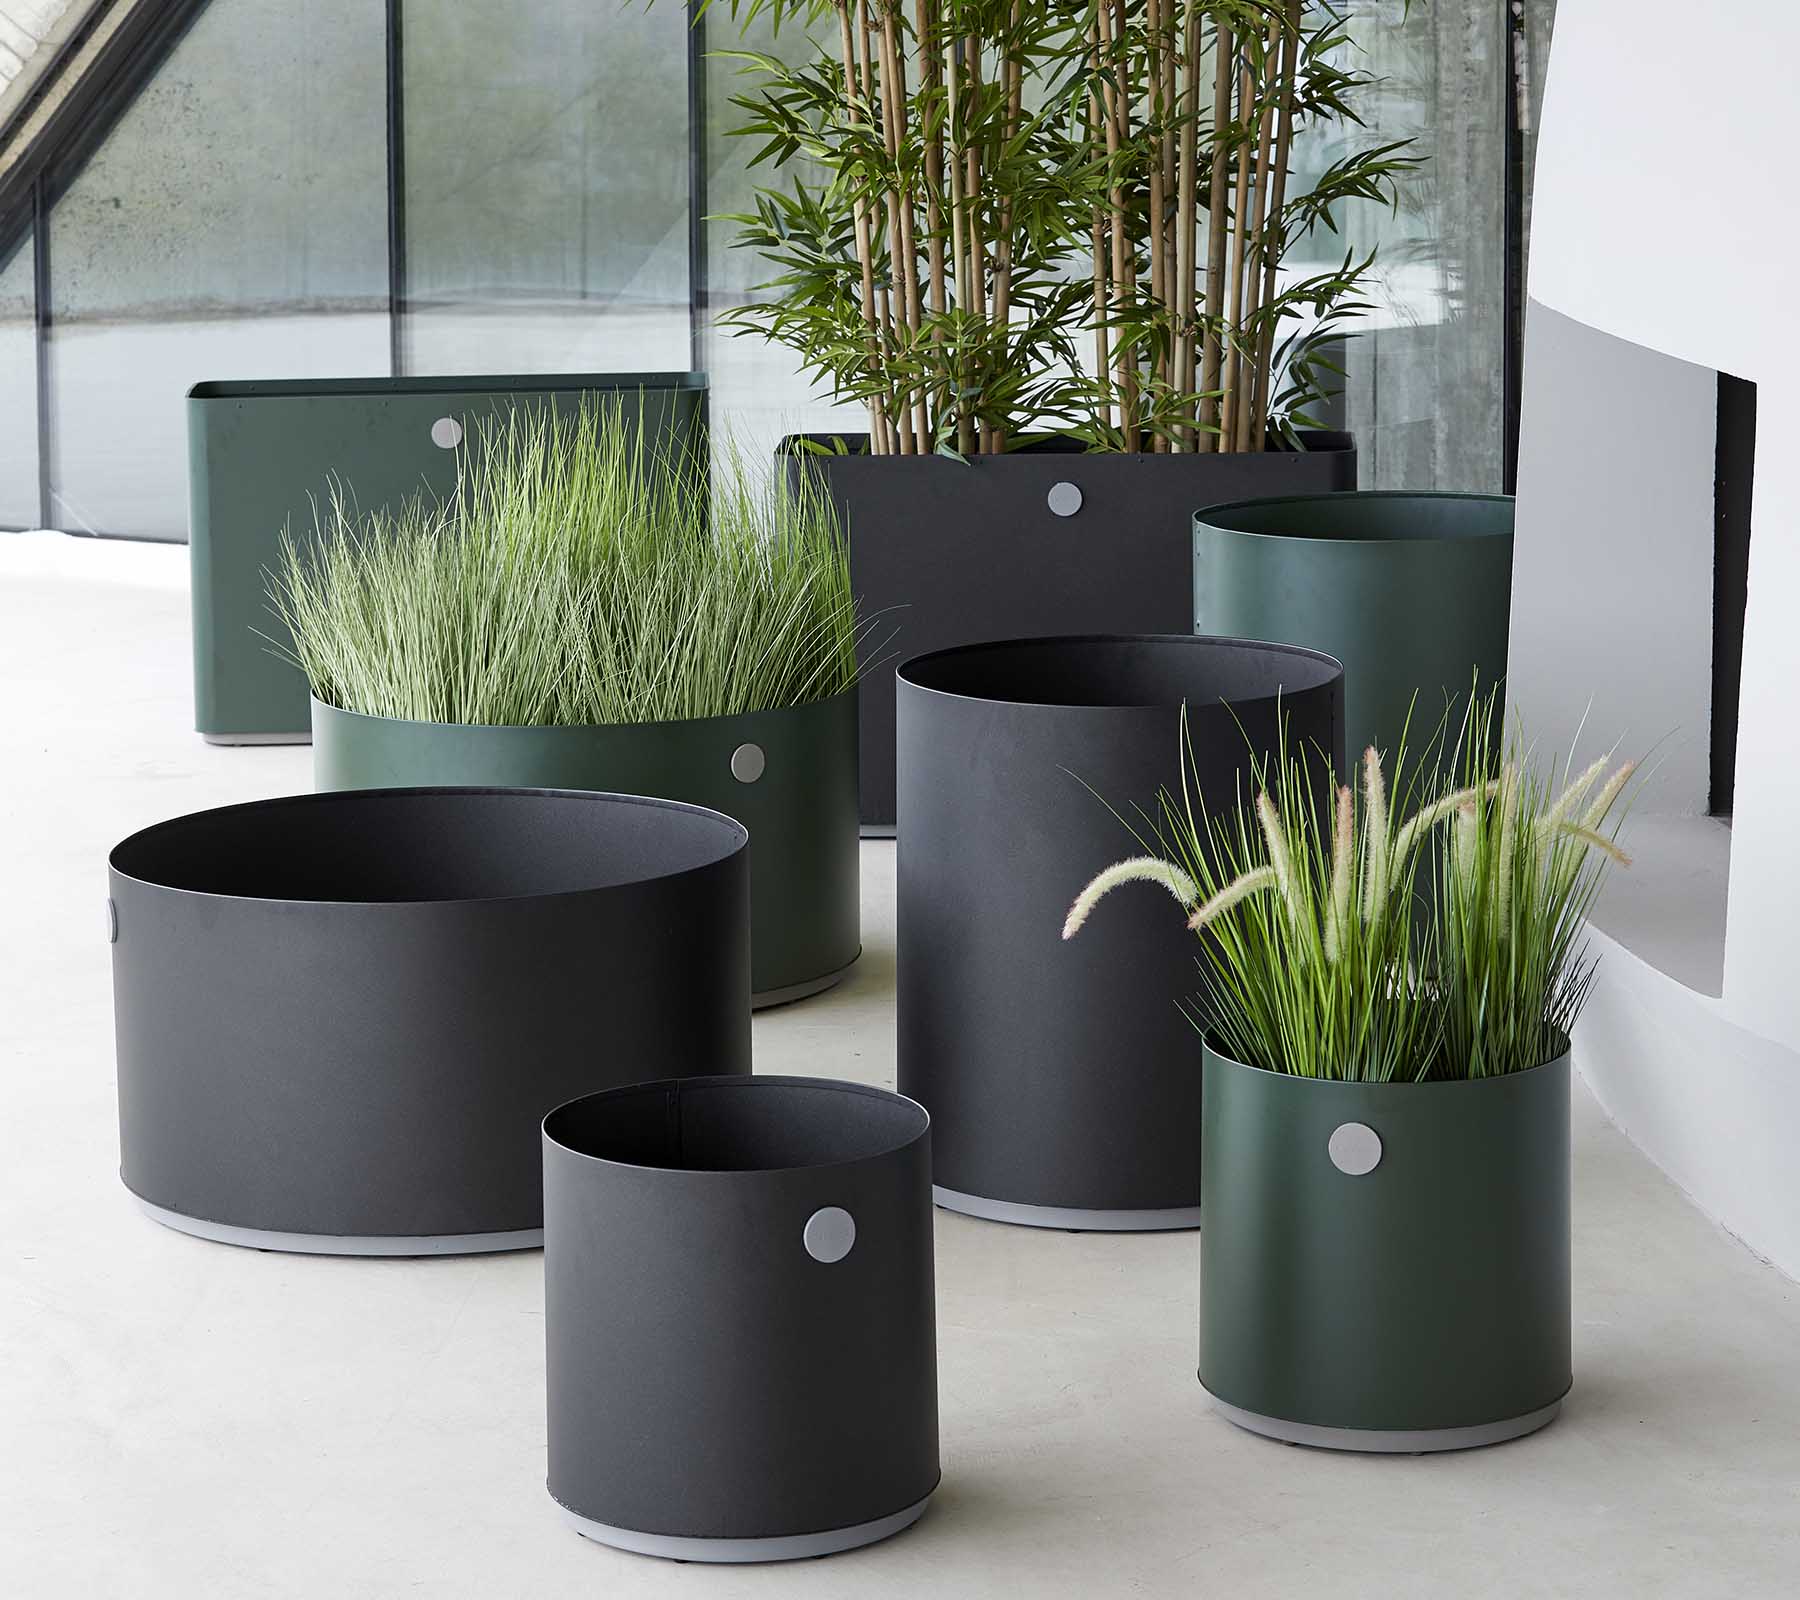 Boxhill's lava grey and dark green outdoor round small modern planter box with other planter box in different shapes and sizes